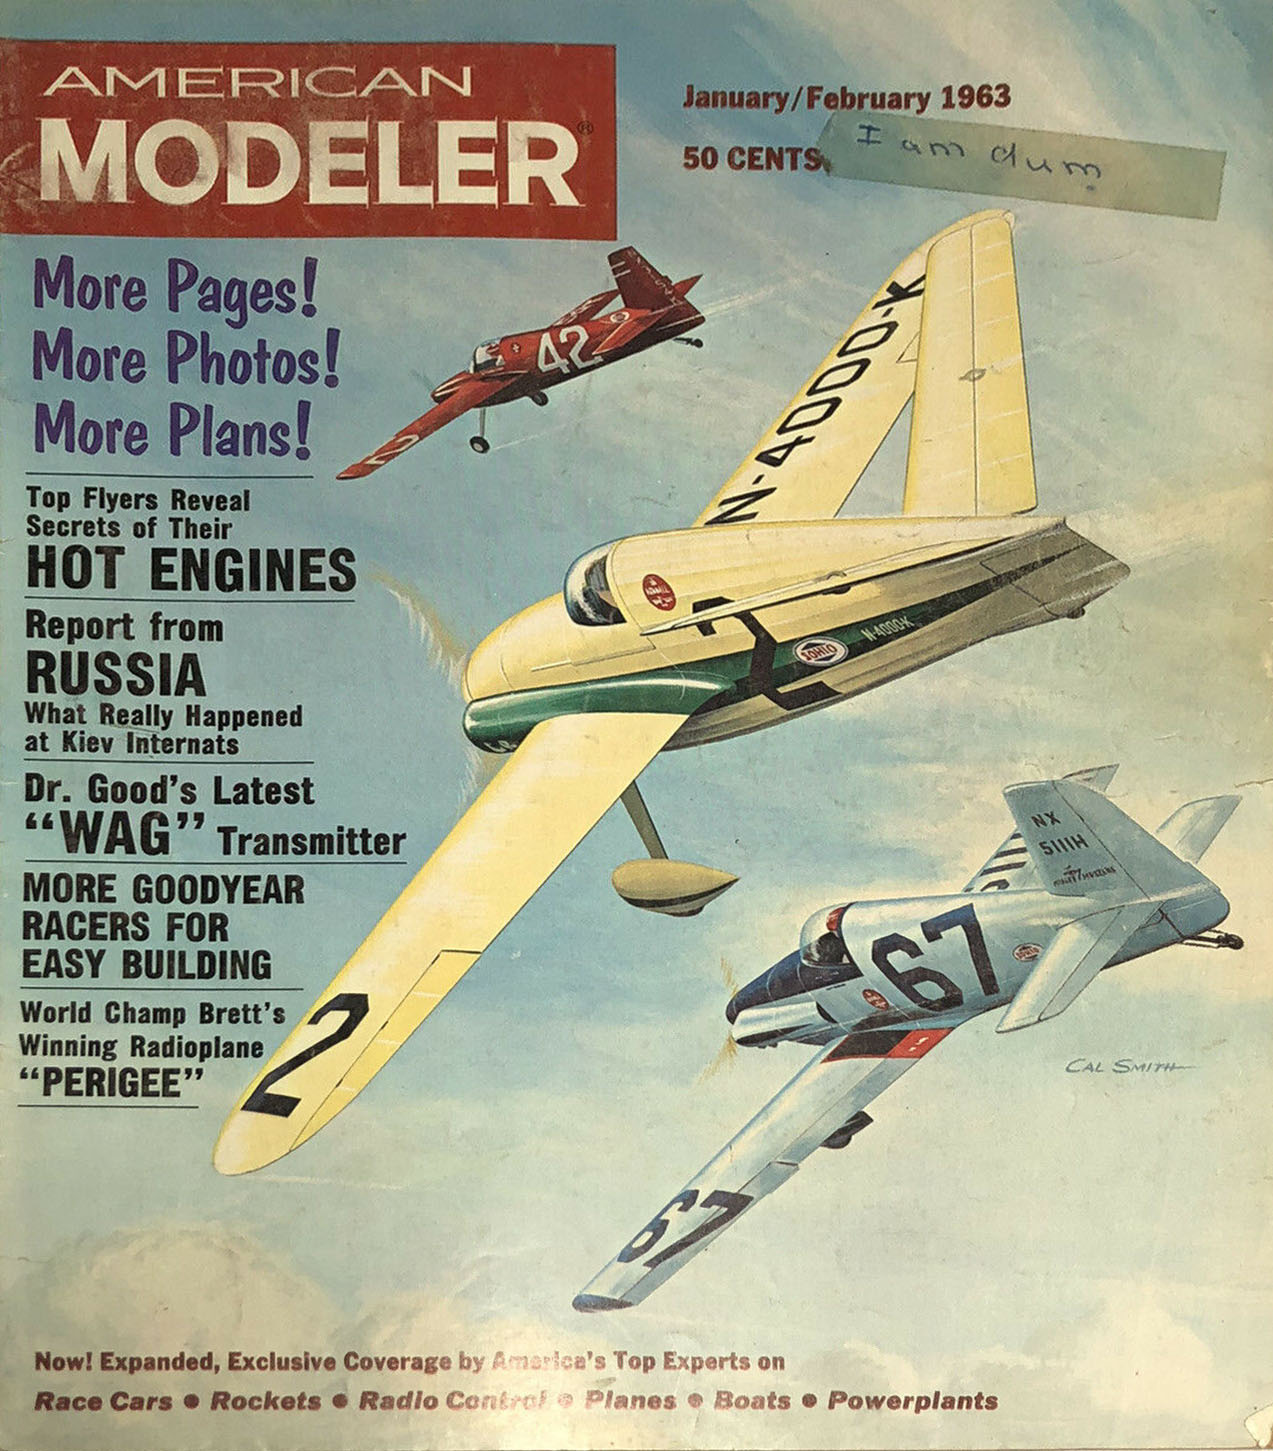 American Modeler January/February 1963, , Top Flyers Reveal Secrets Of Their Hot Engines